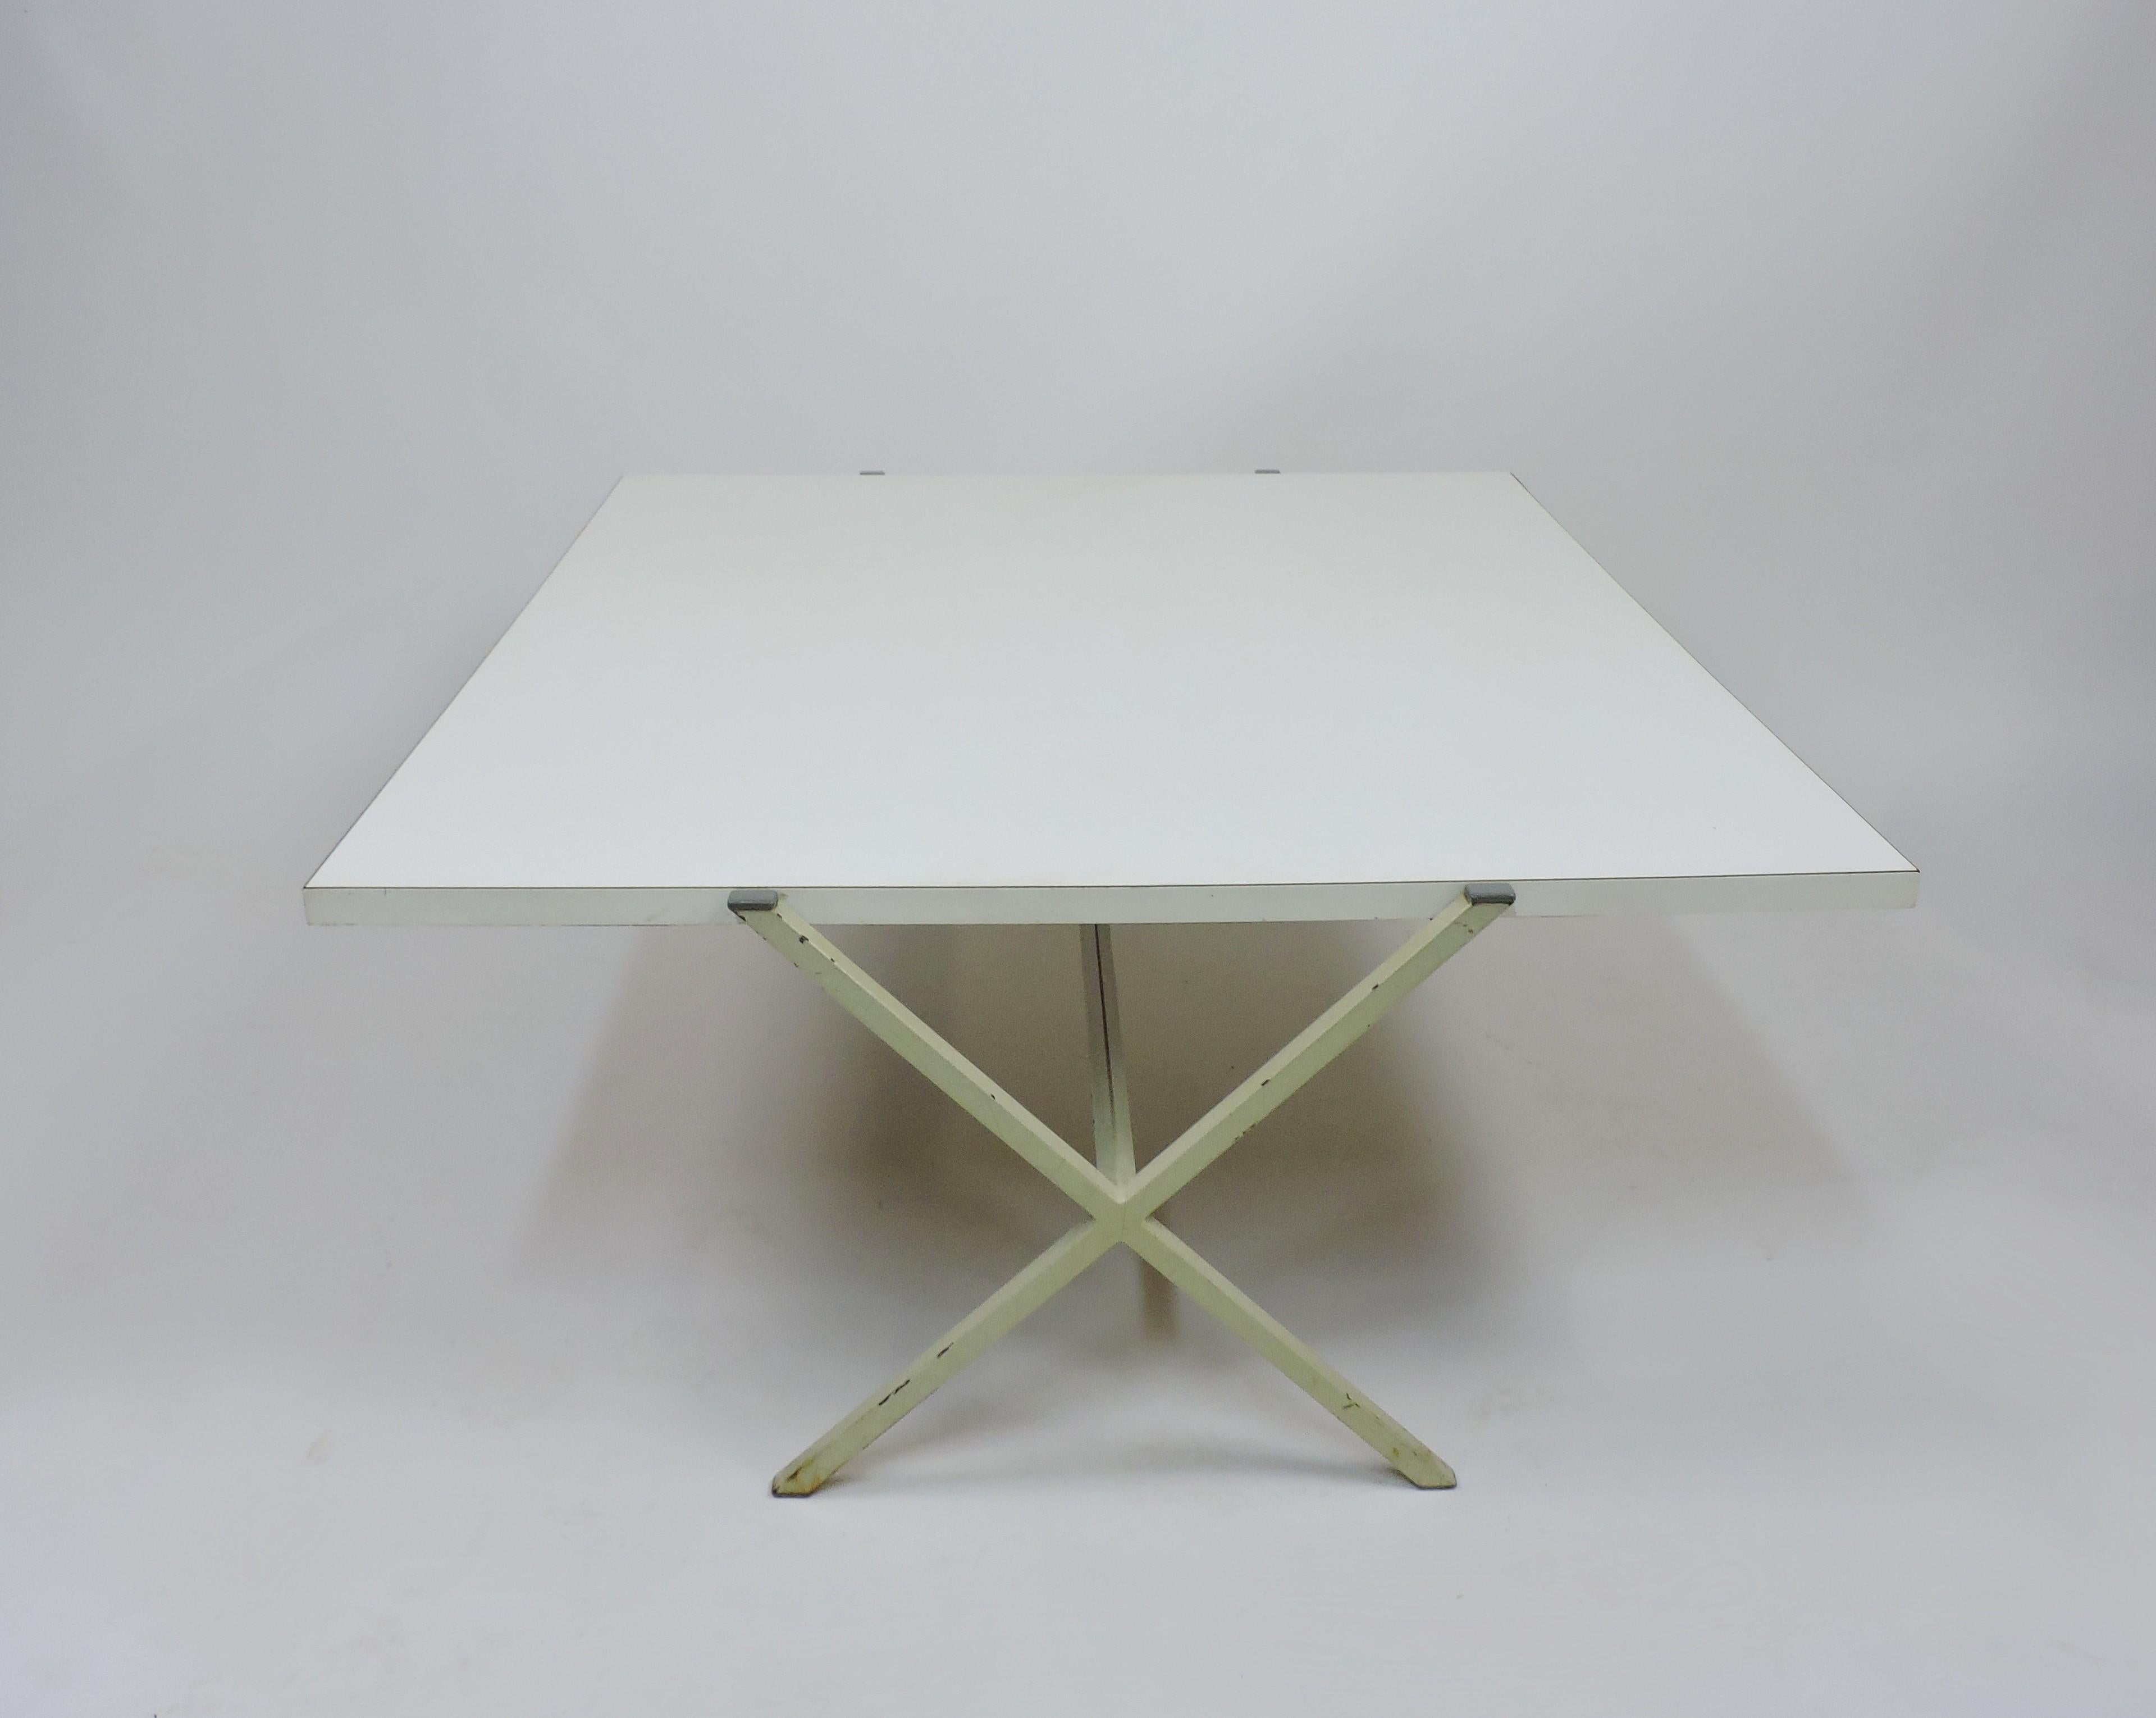 Clean and crisp architectural style coffee table designed by renowned architect, Radislav Rado and manufactured by Knoll and Drake. This rare minimalist table has a white laminate top and an enameled steel base in an X form. It was manufactured as